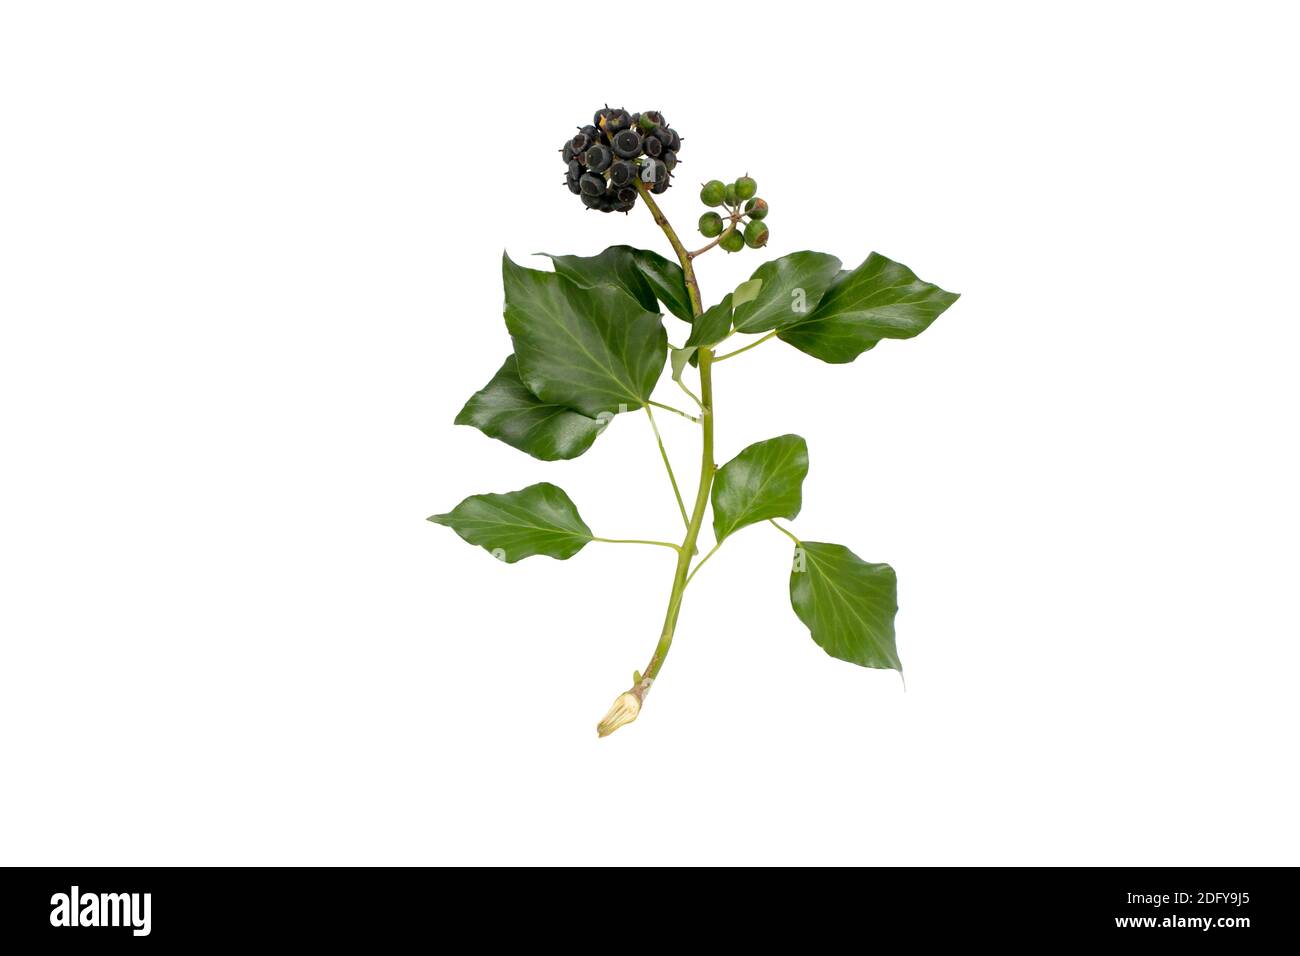 Commom ivy branch with leaves and fruits isolated on white. Hedera helix plant. Stock Photo